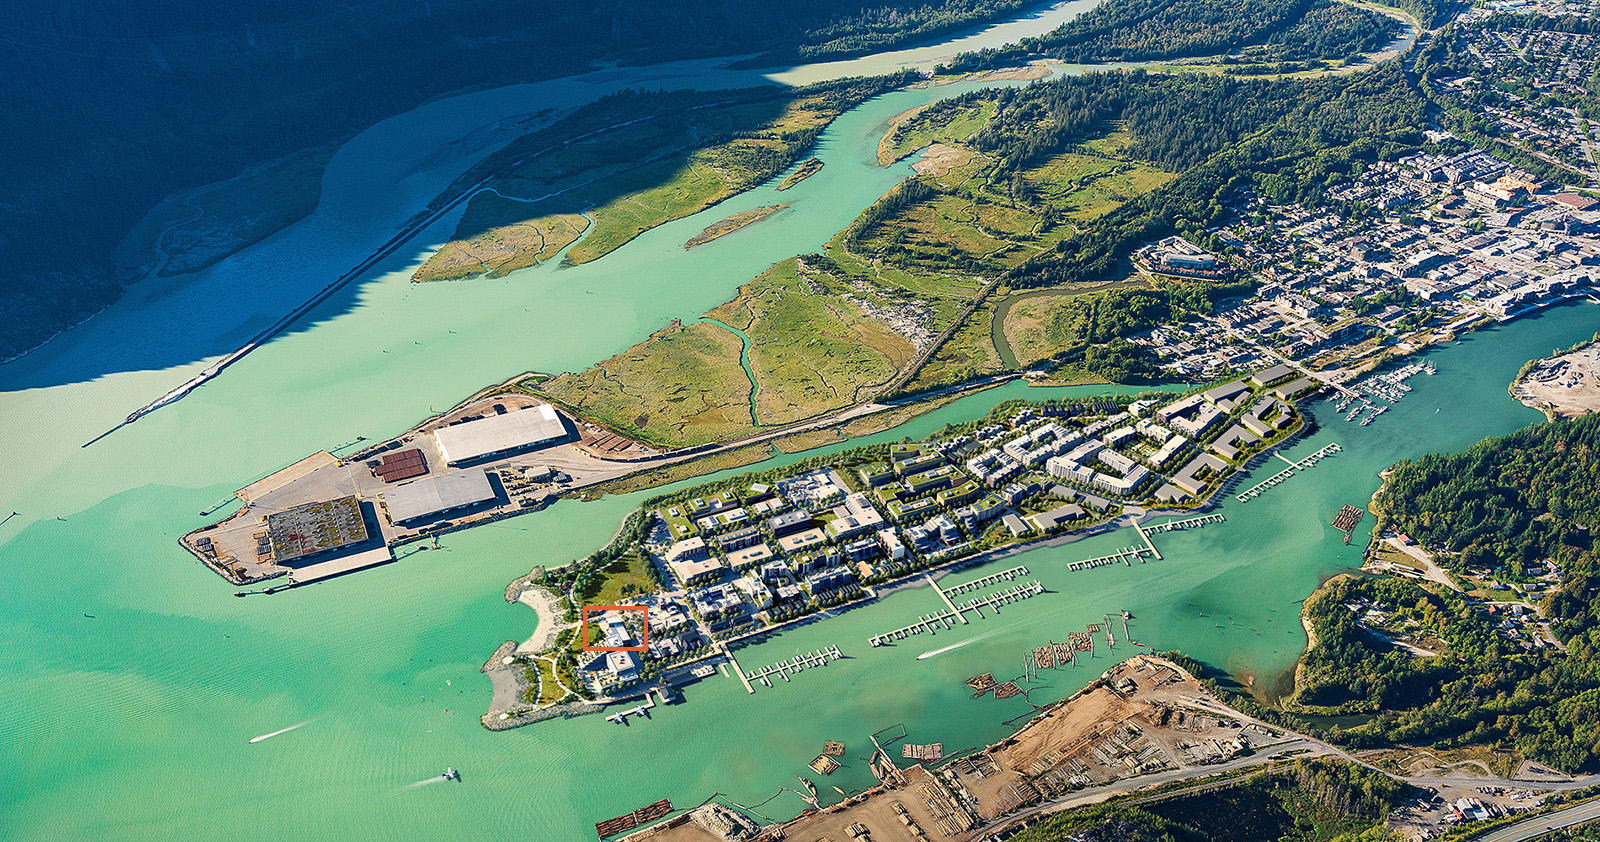 Aerial imagery of Howe Sound and the Oceanfront Squamish development